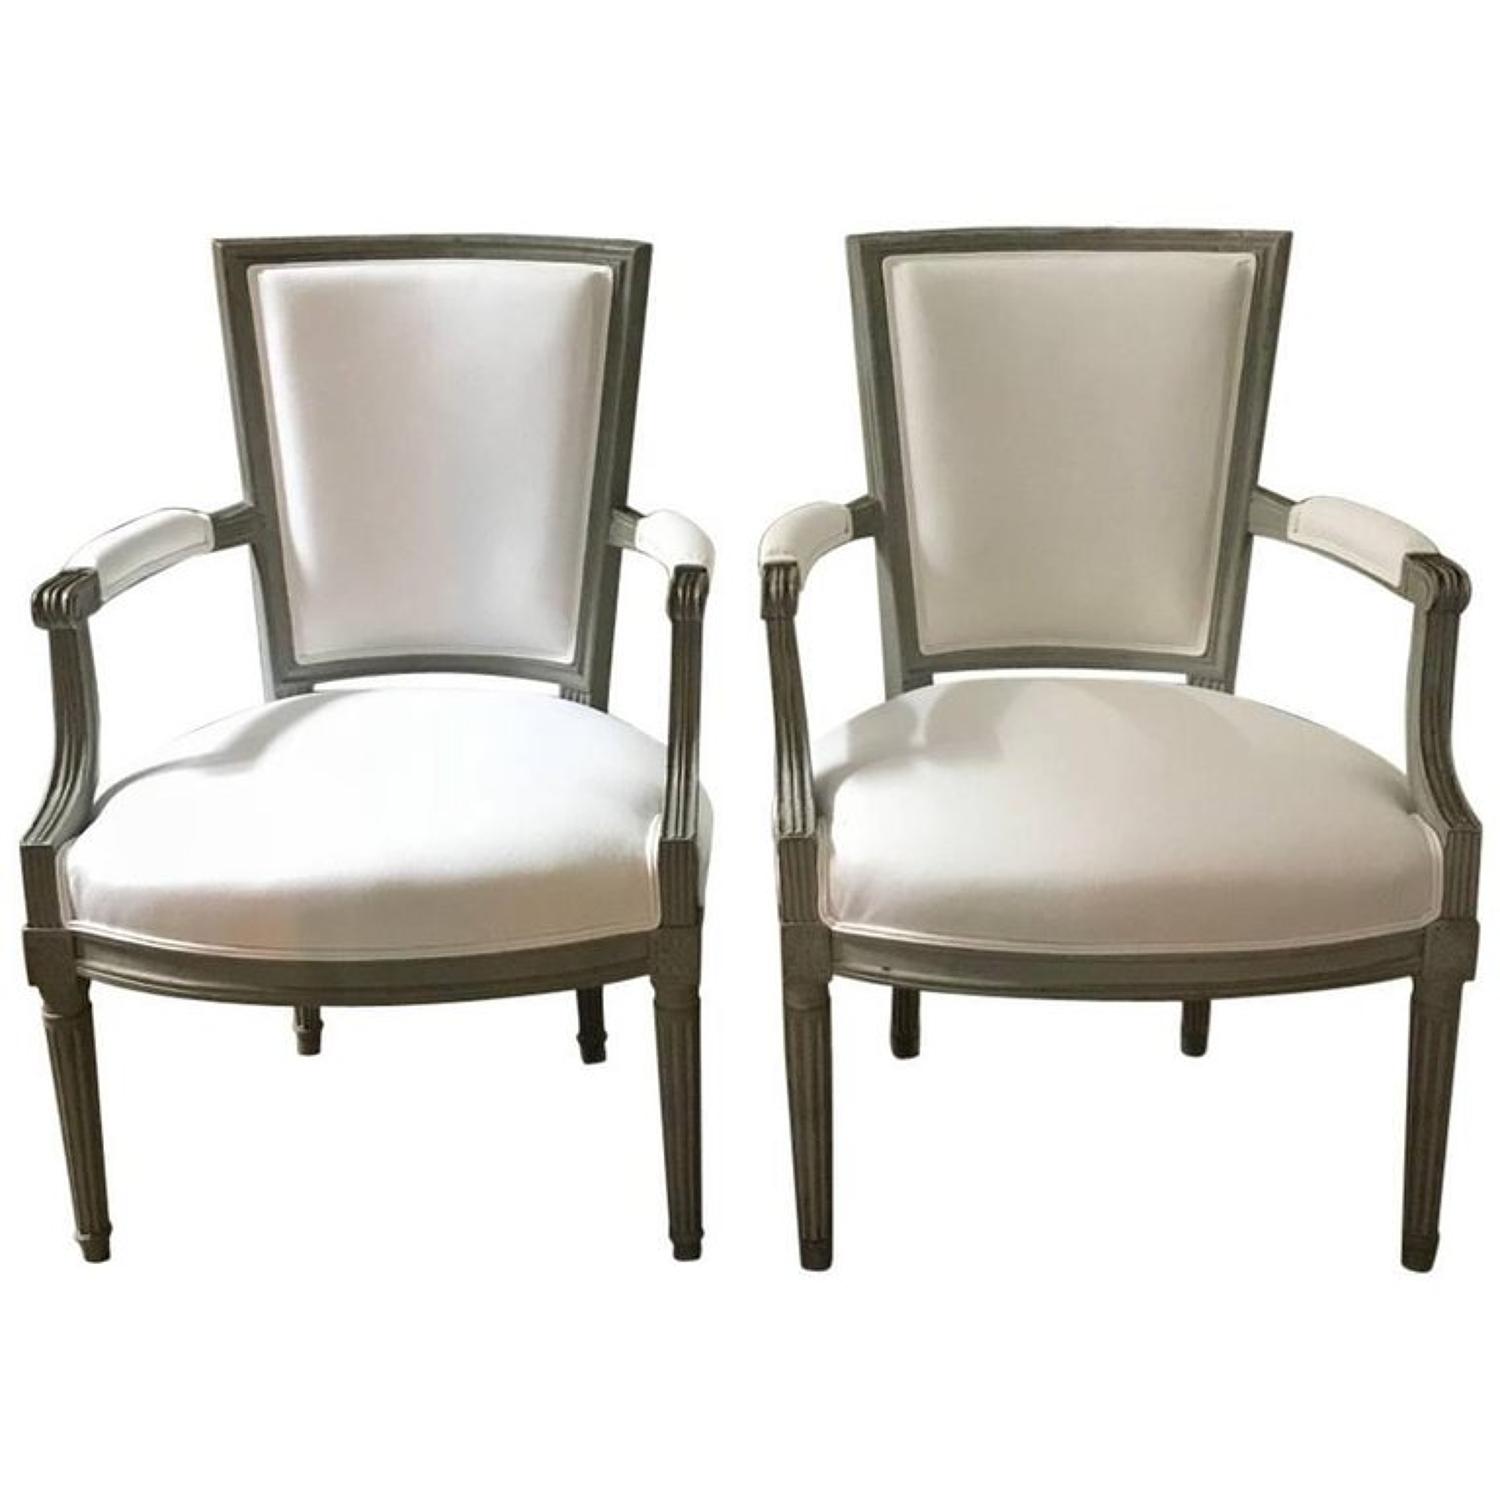 Pair of French Louis XVI Armchairs, 18th Century